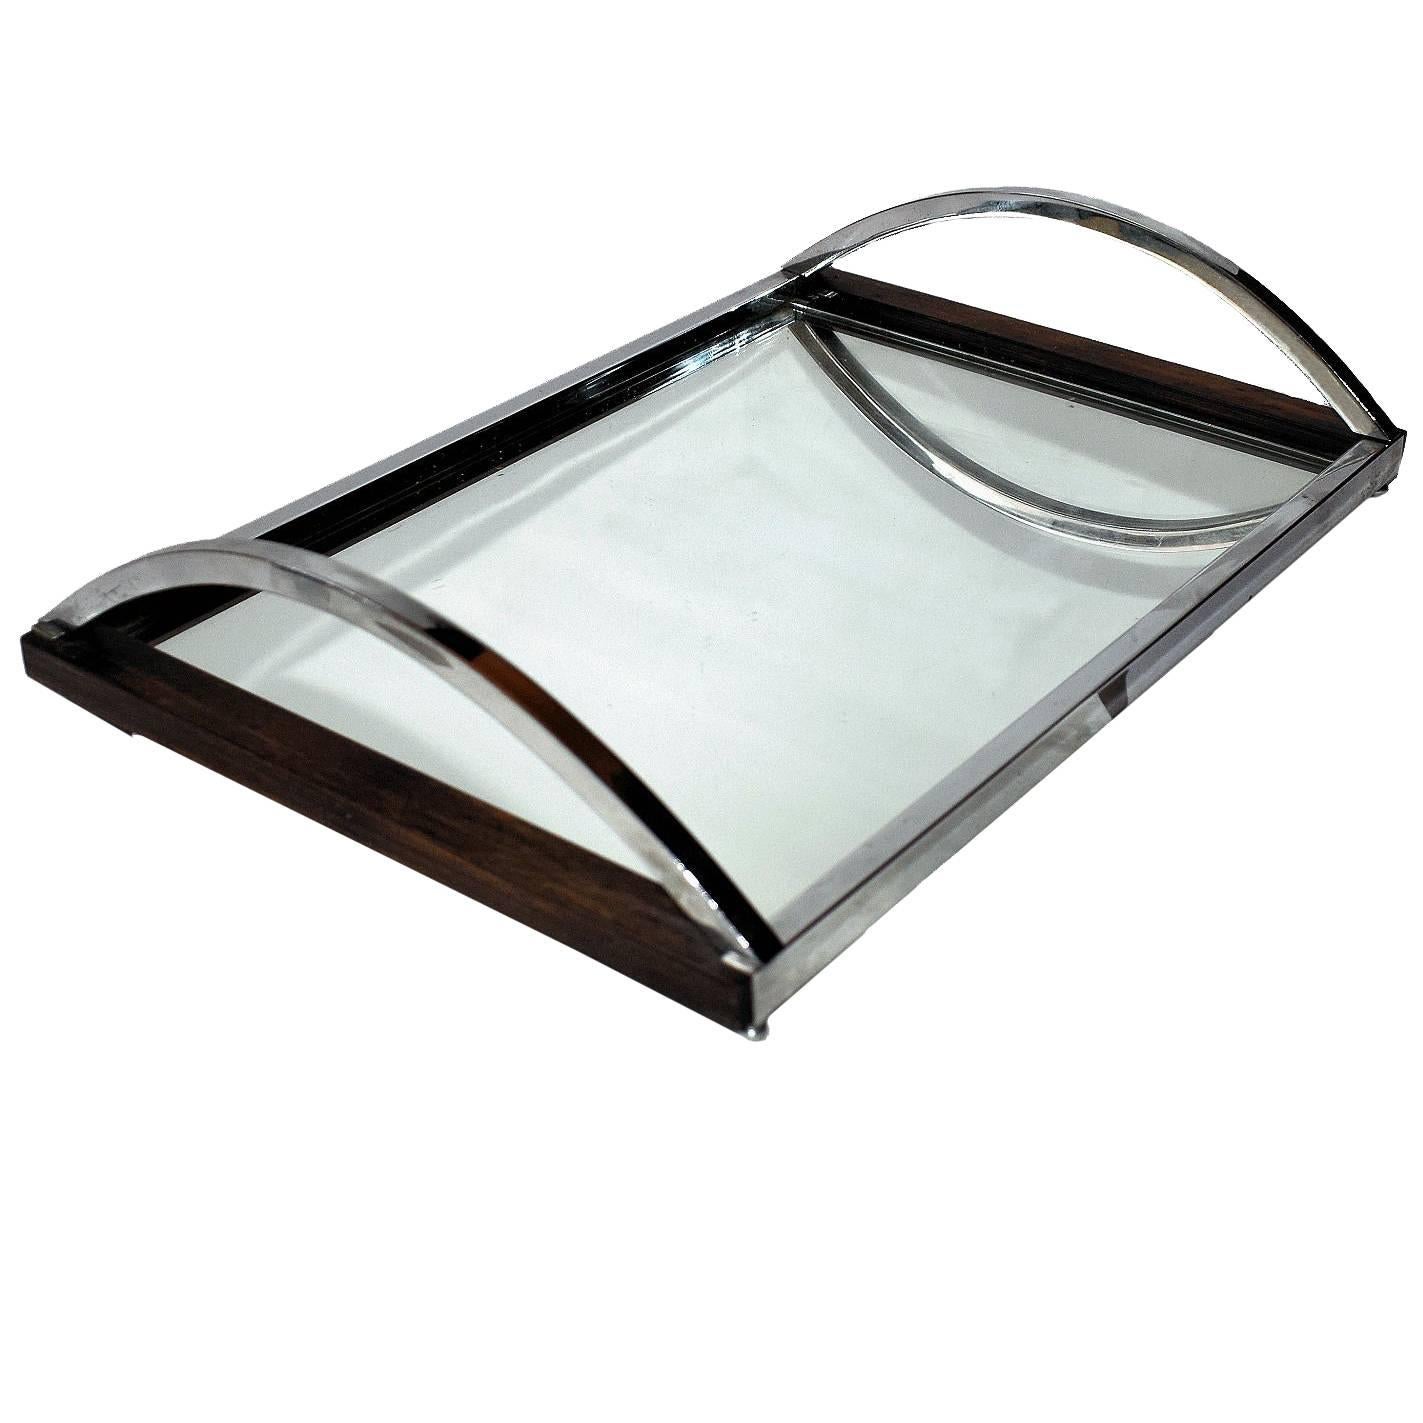 Art Deco Modernist Chrome and Mirror Tray